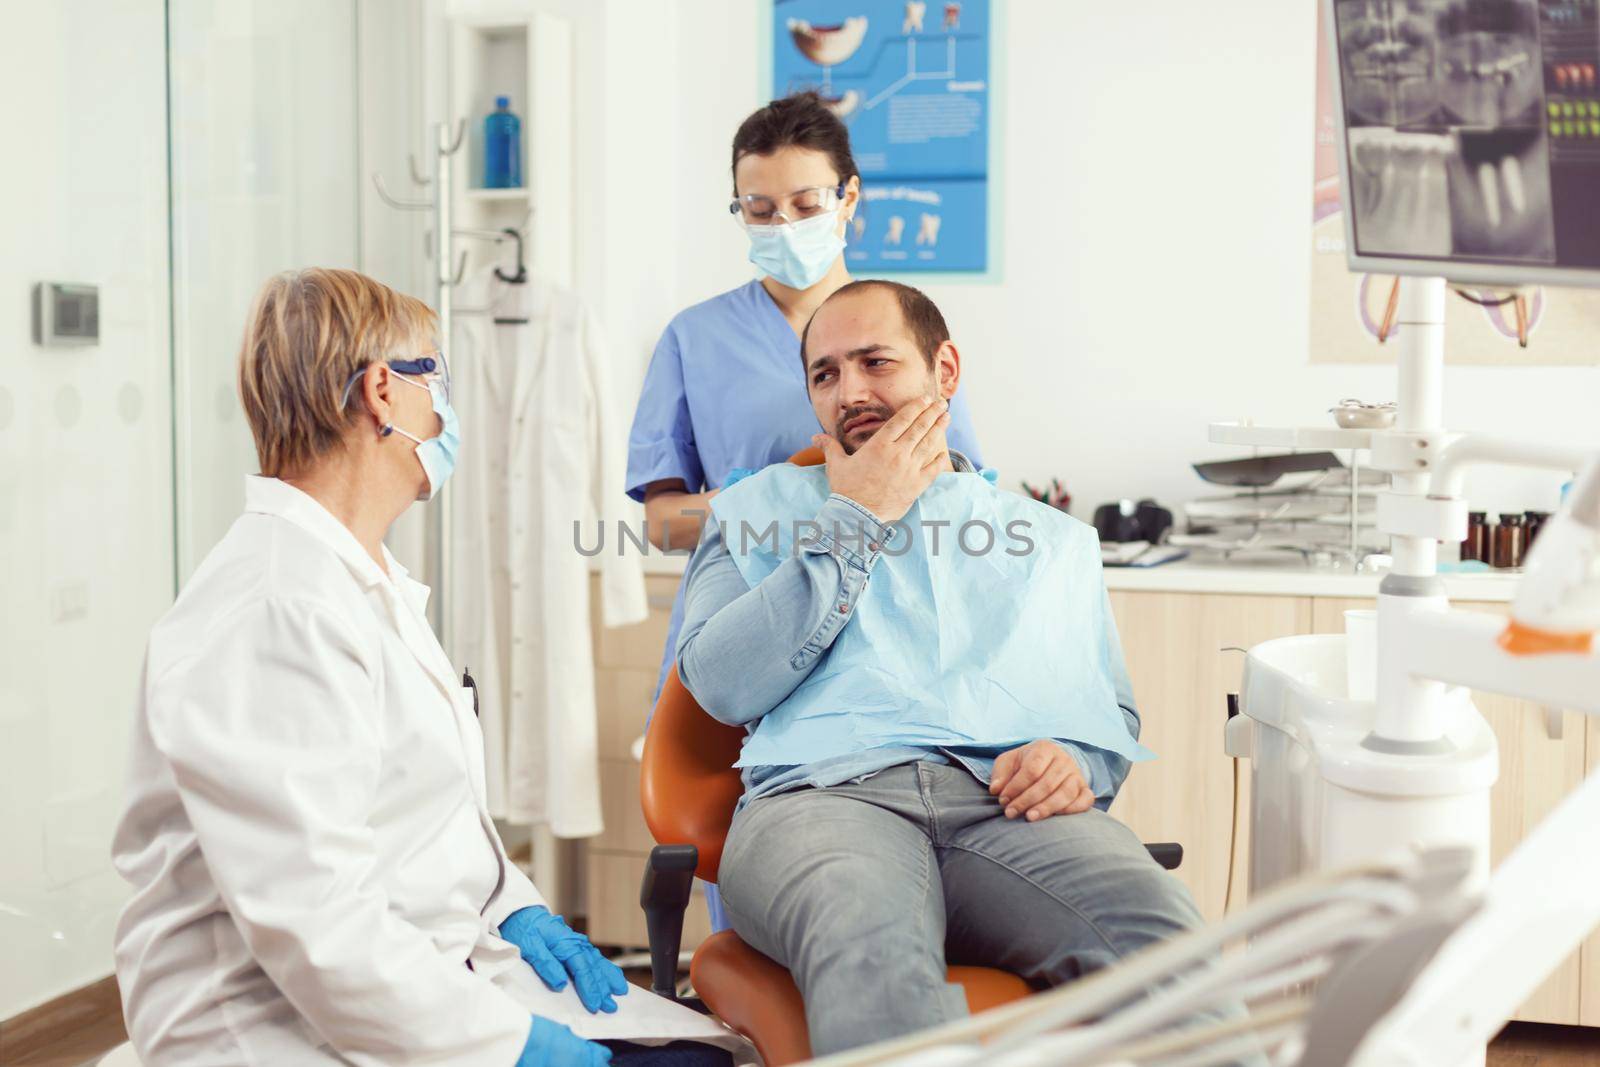 Sick patient complaining about toothache while talking with dentist by DCStudio